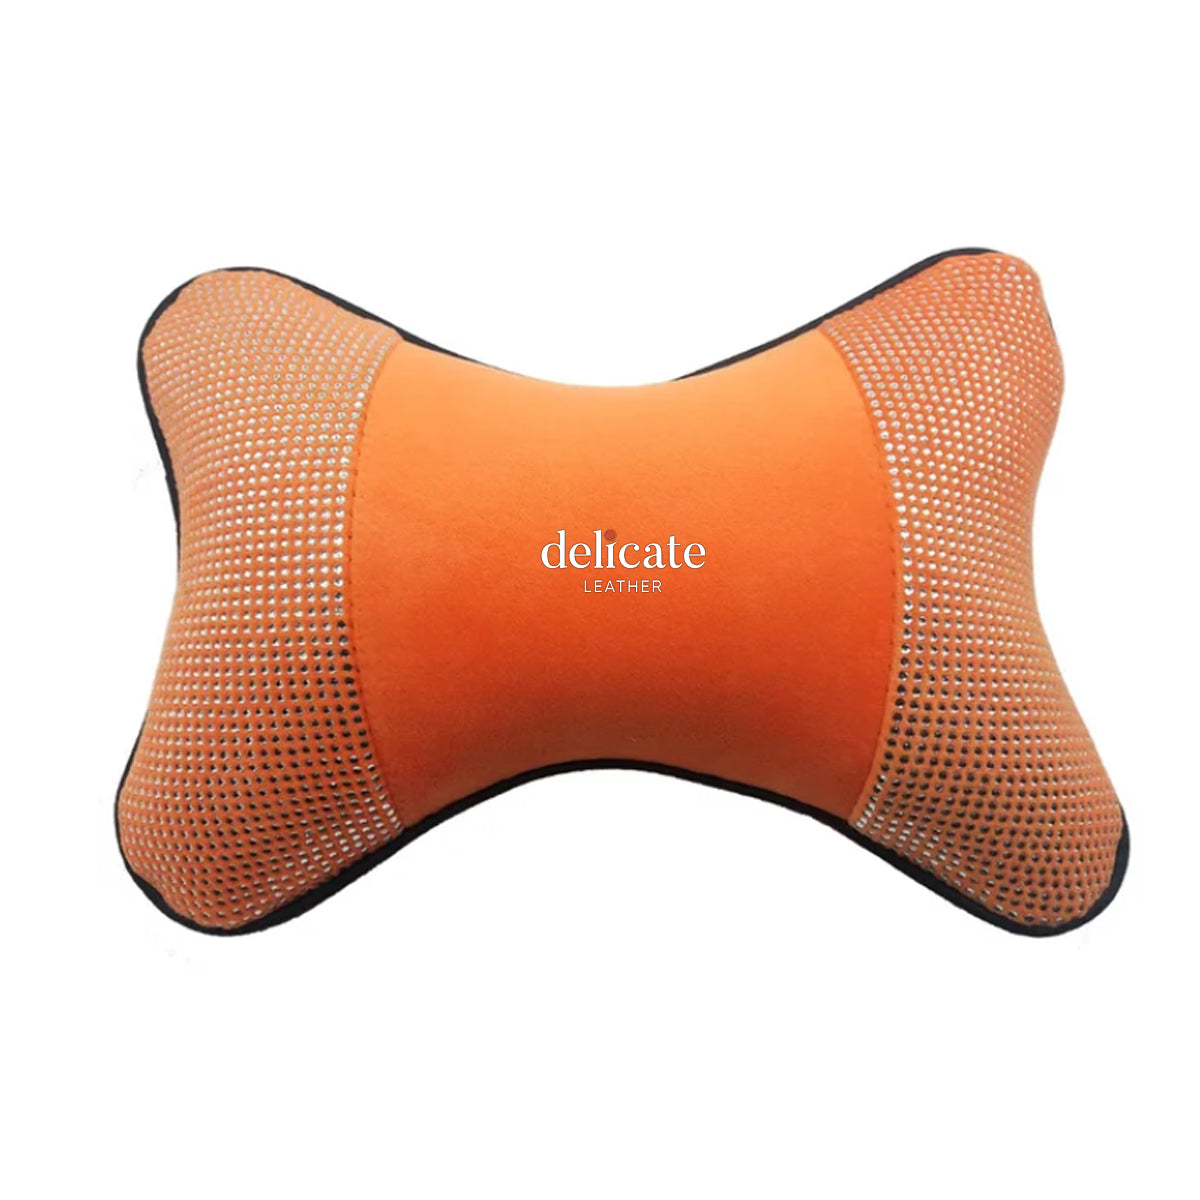 Universal Car Neck Pillow for Comfortable Support - Compatible with Most Auto Accessories and Filled with Fiber Material